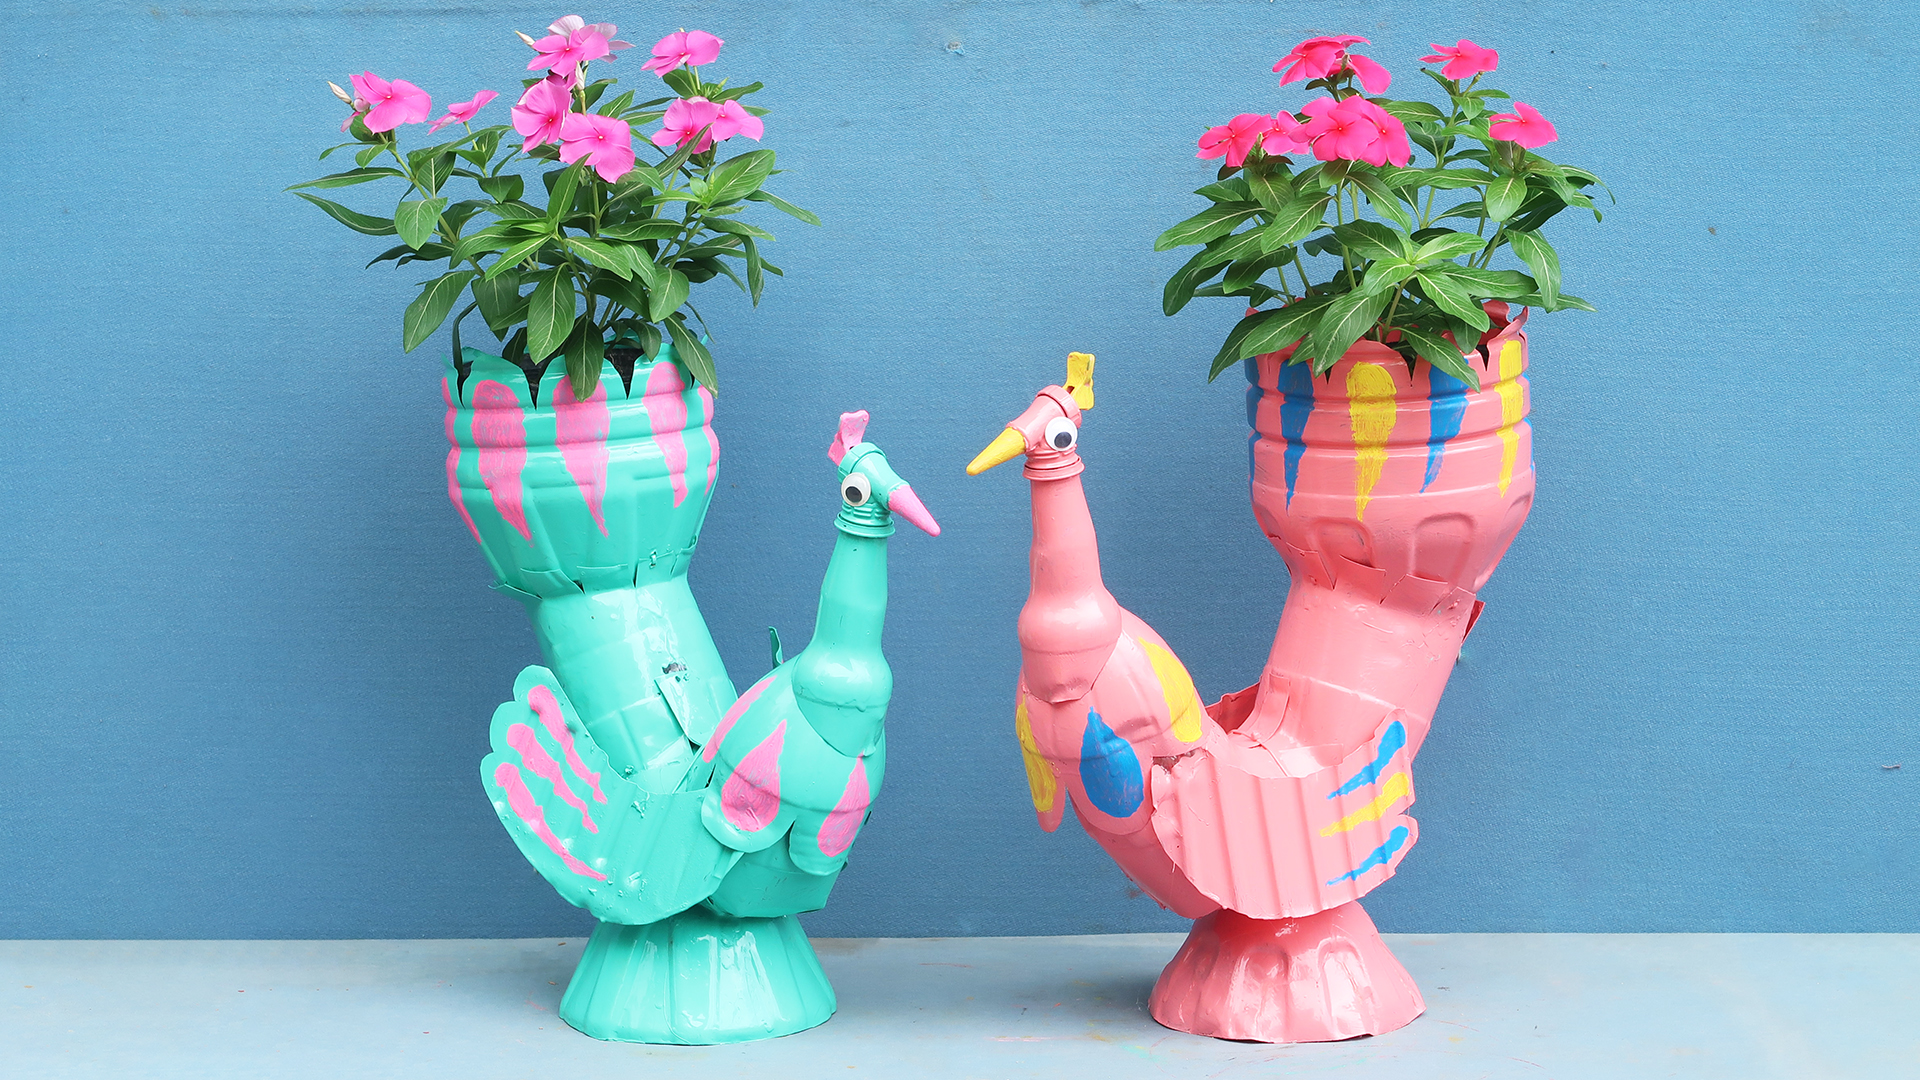 Recycle Plastic Bottles To Make Beautiful Swan-Shaped Flower Pots